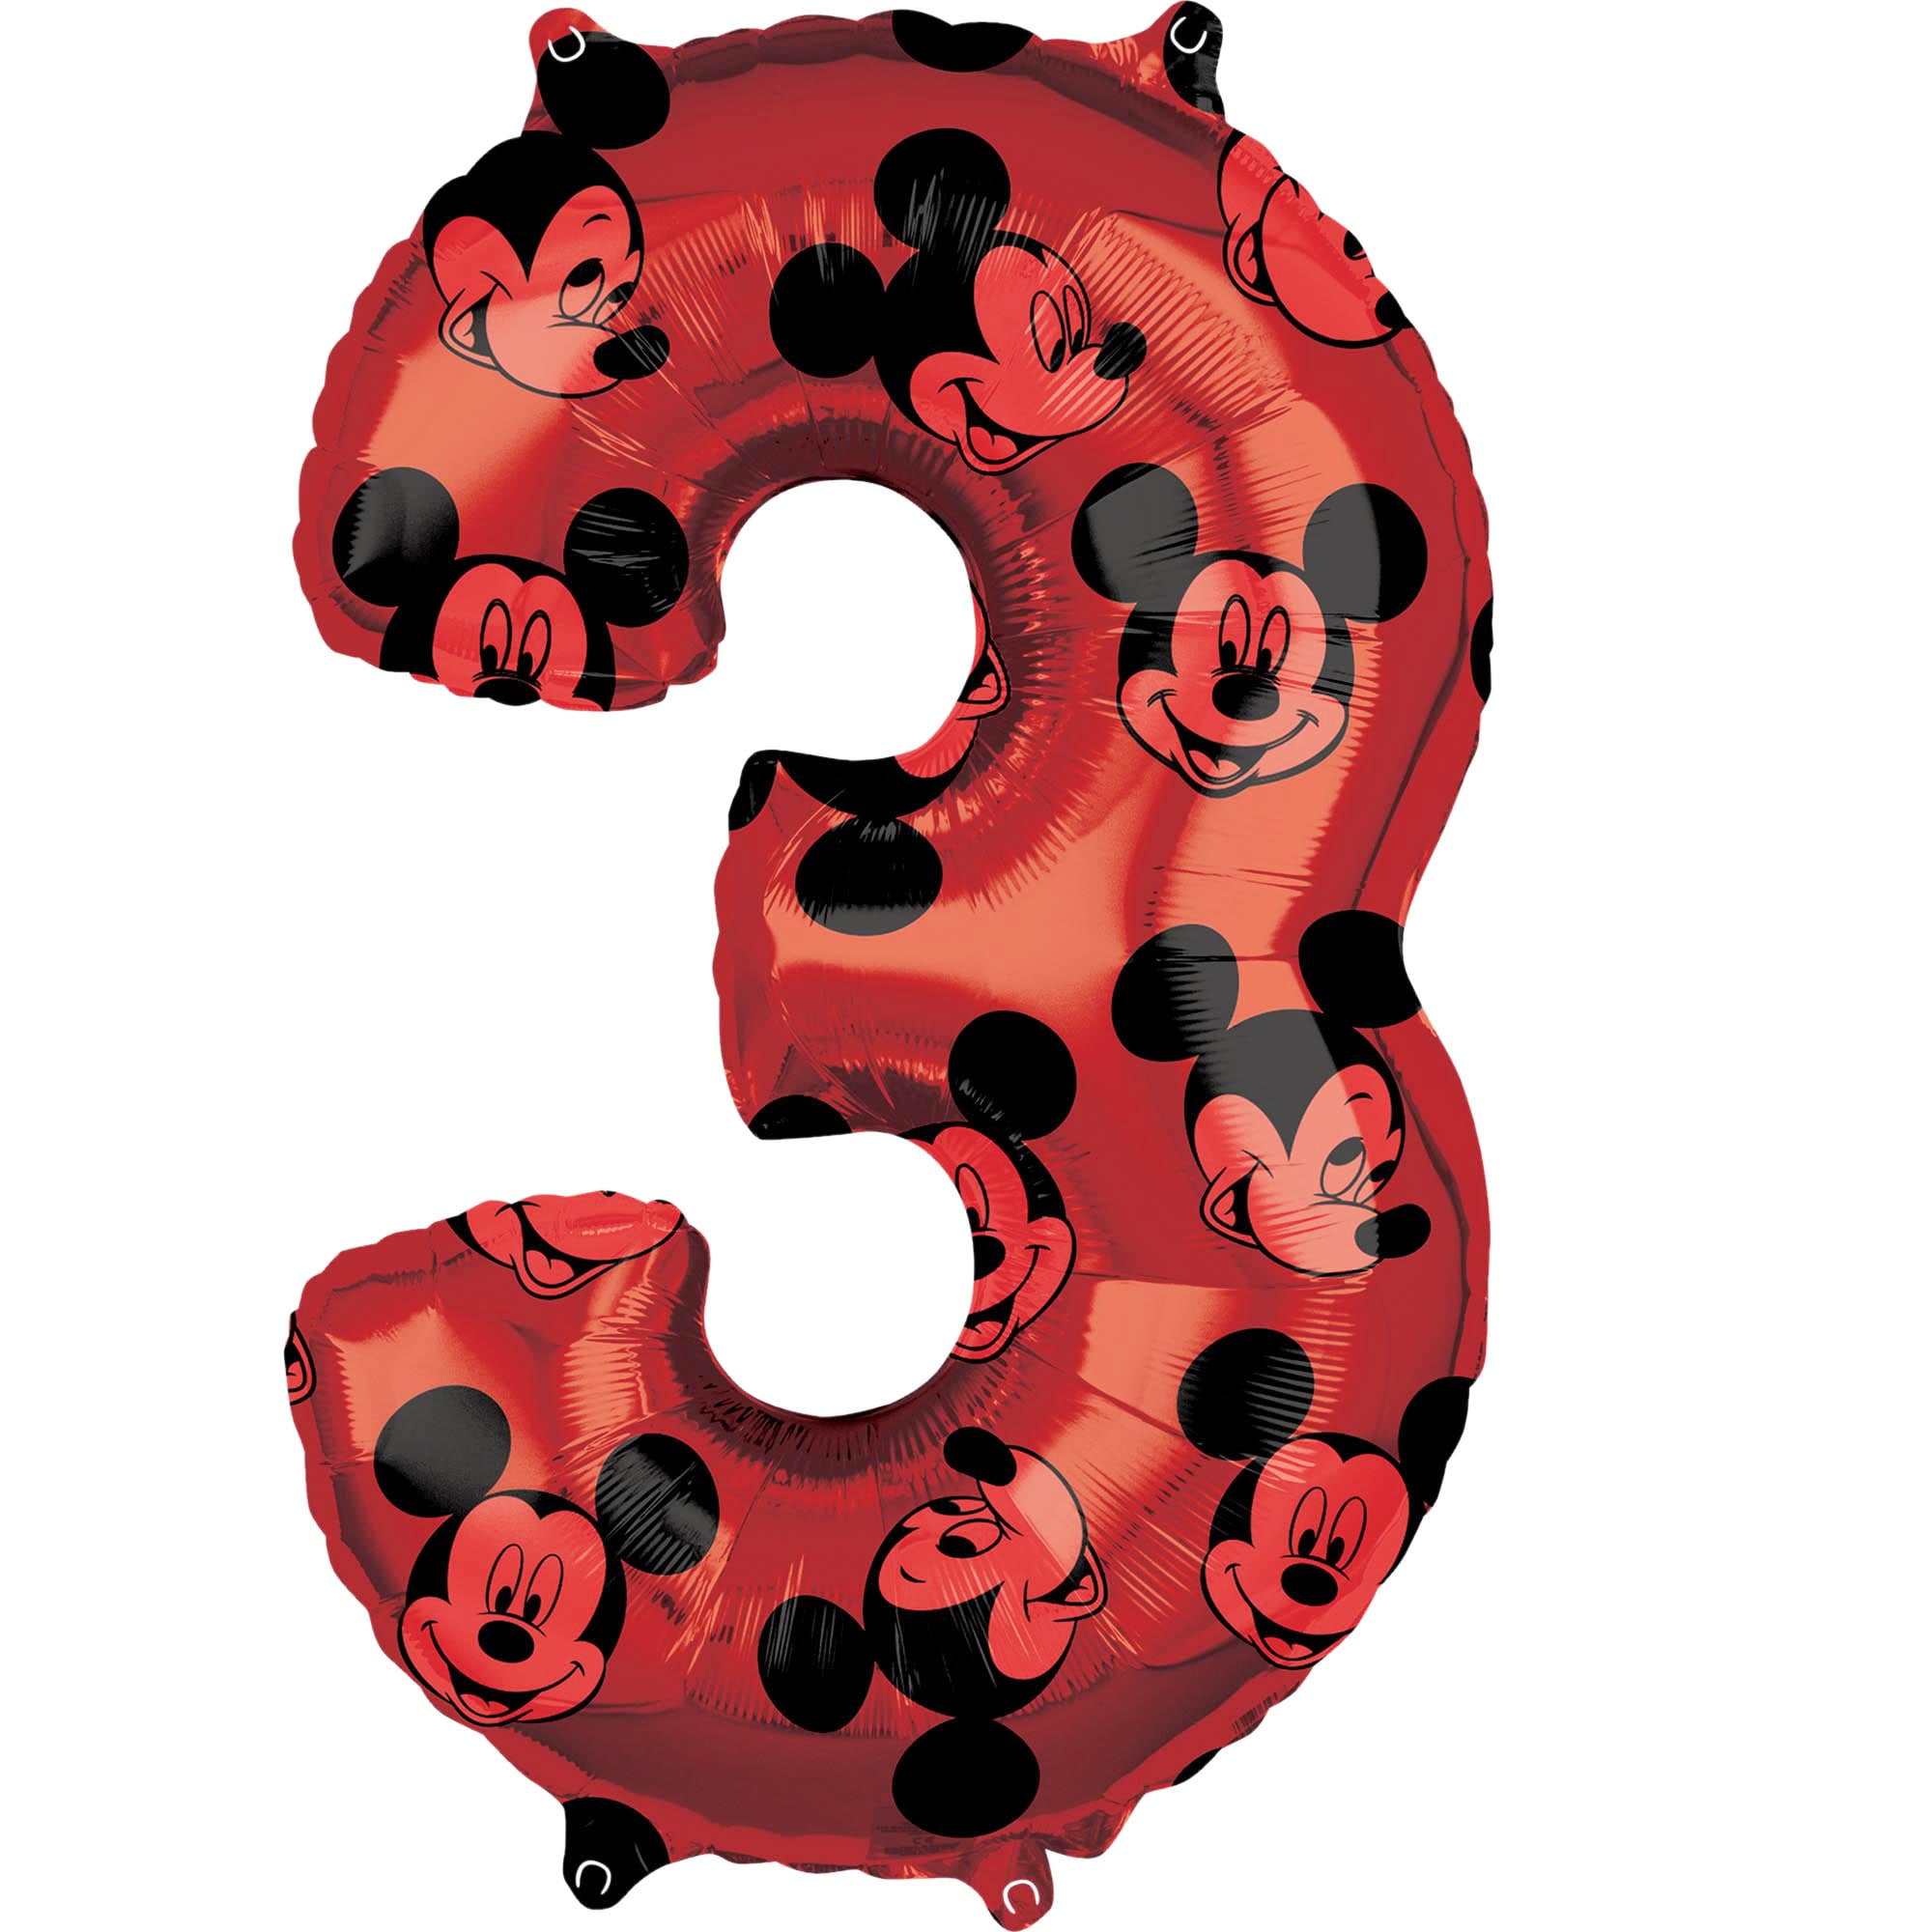 Mickey Mouse 1st Birthday Decorations, Balloon Arch Garland kit, Happy  Birthday Banner 45 Inch Giant Jumbo Mickey Mouse foil balloon, Door Sign  Cake 